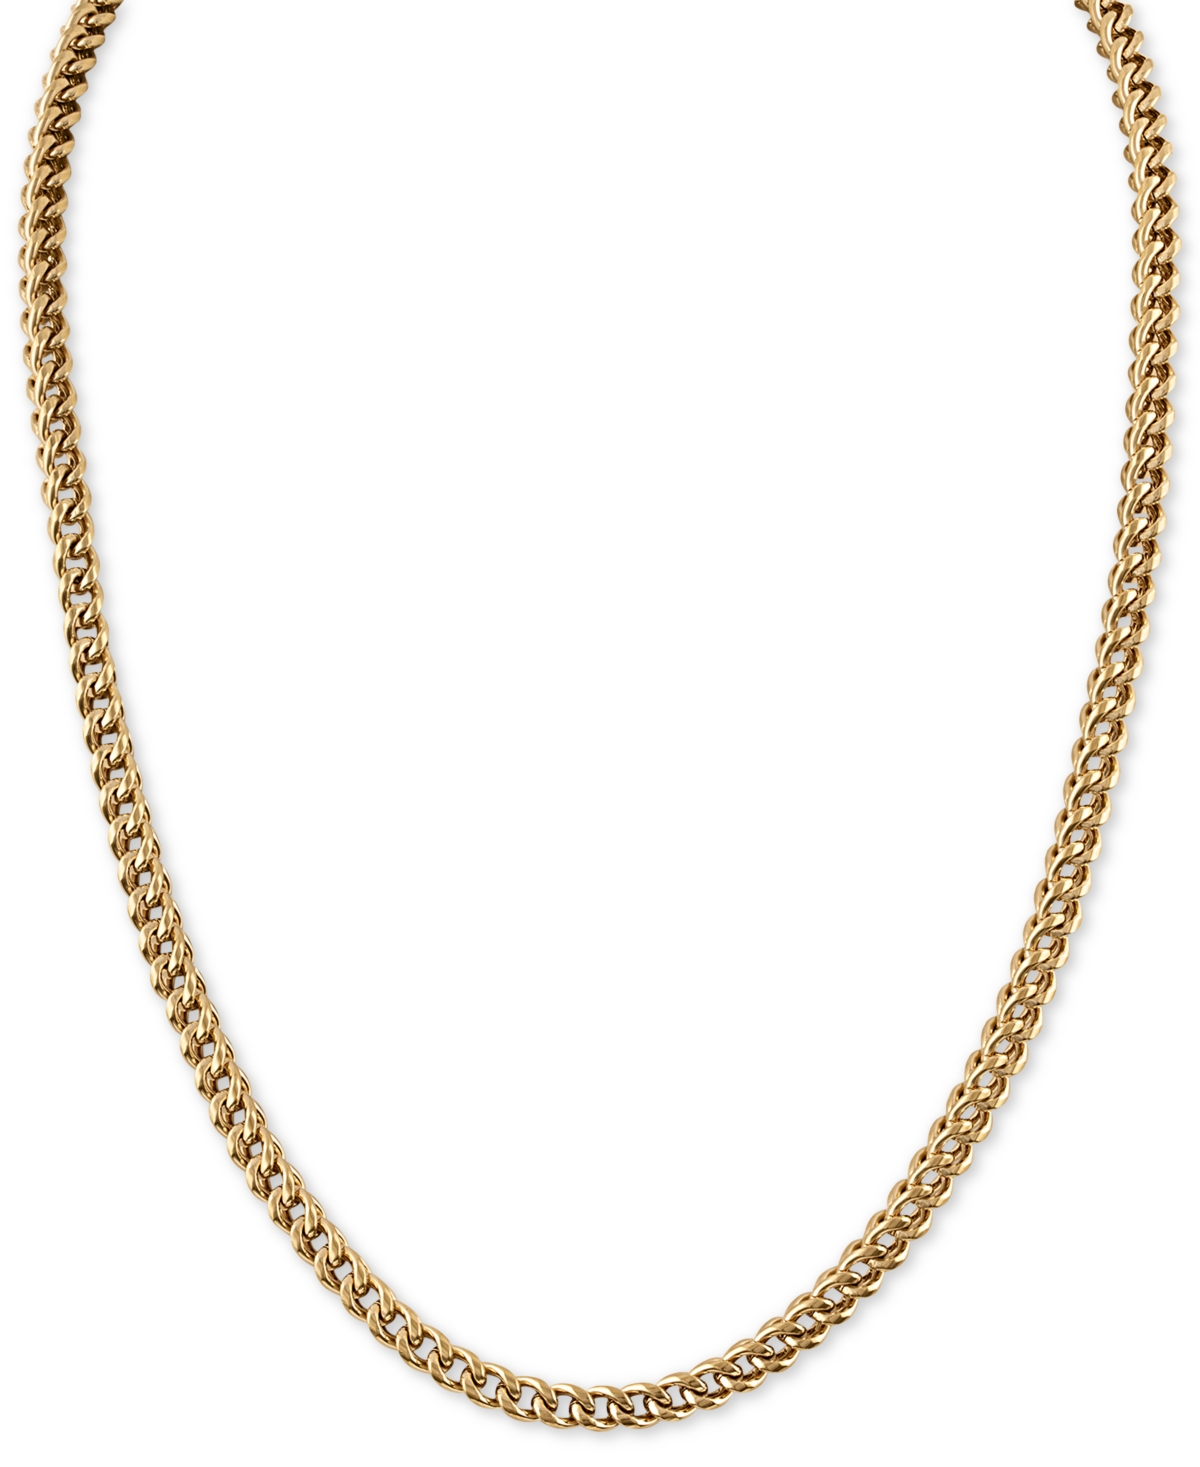 22" Foxtail Chain Necklace in Gold-Tone Ion-Plated Stainless Steel, Created for Macy's - Gold Tone